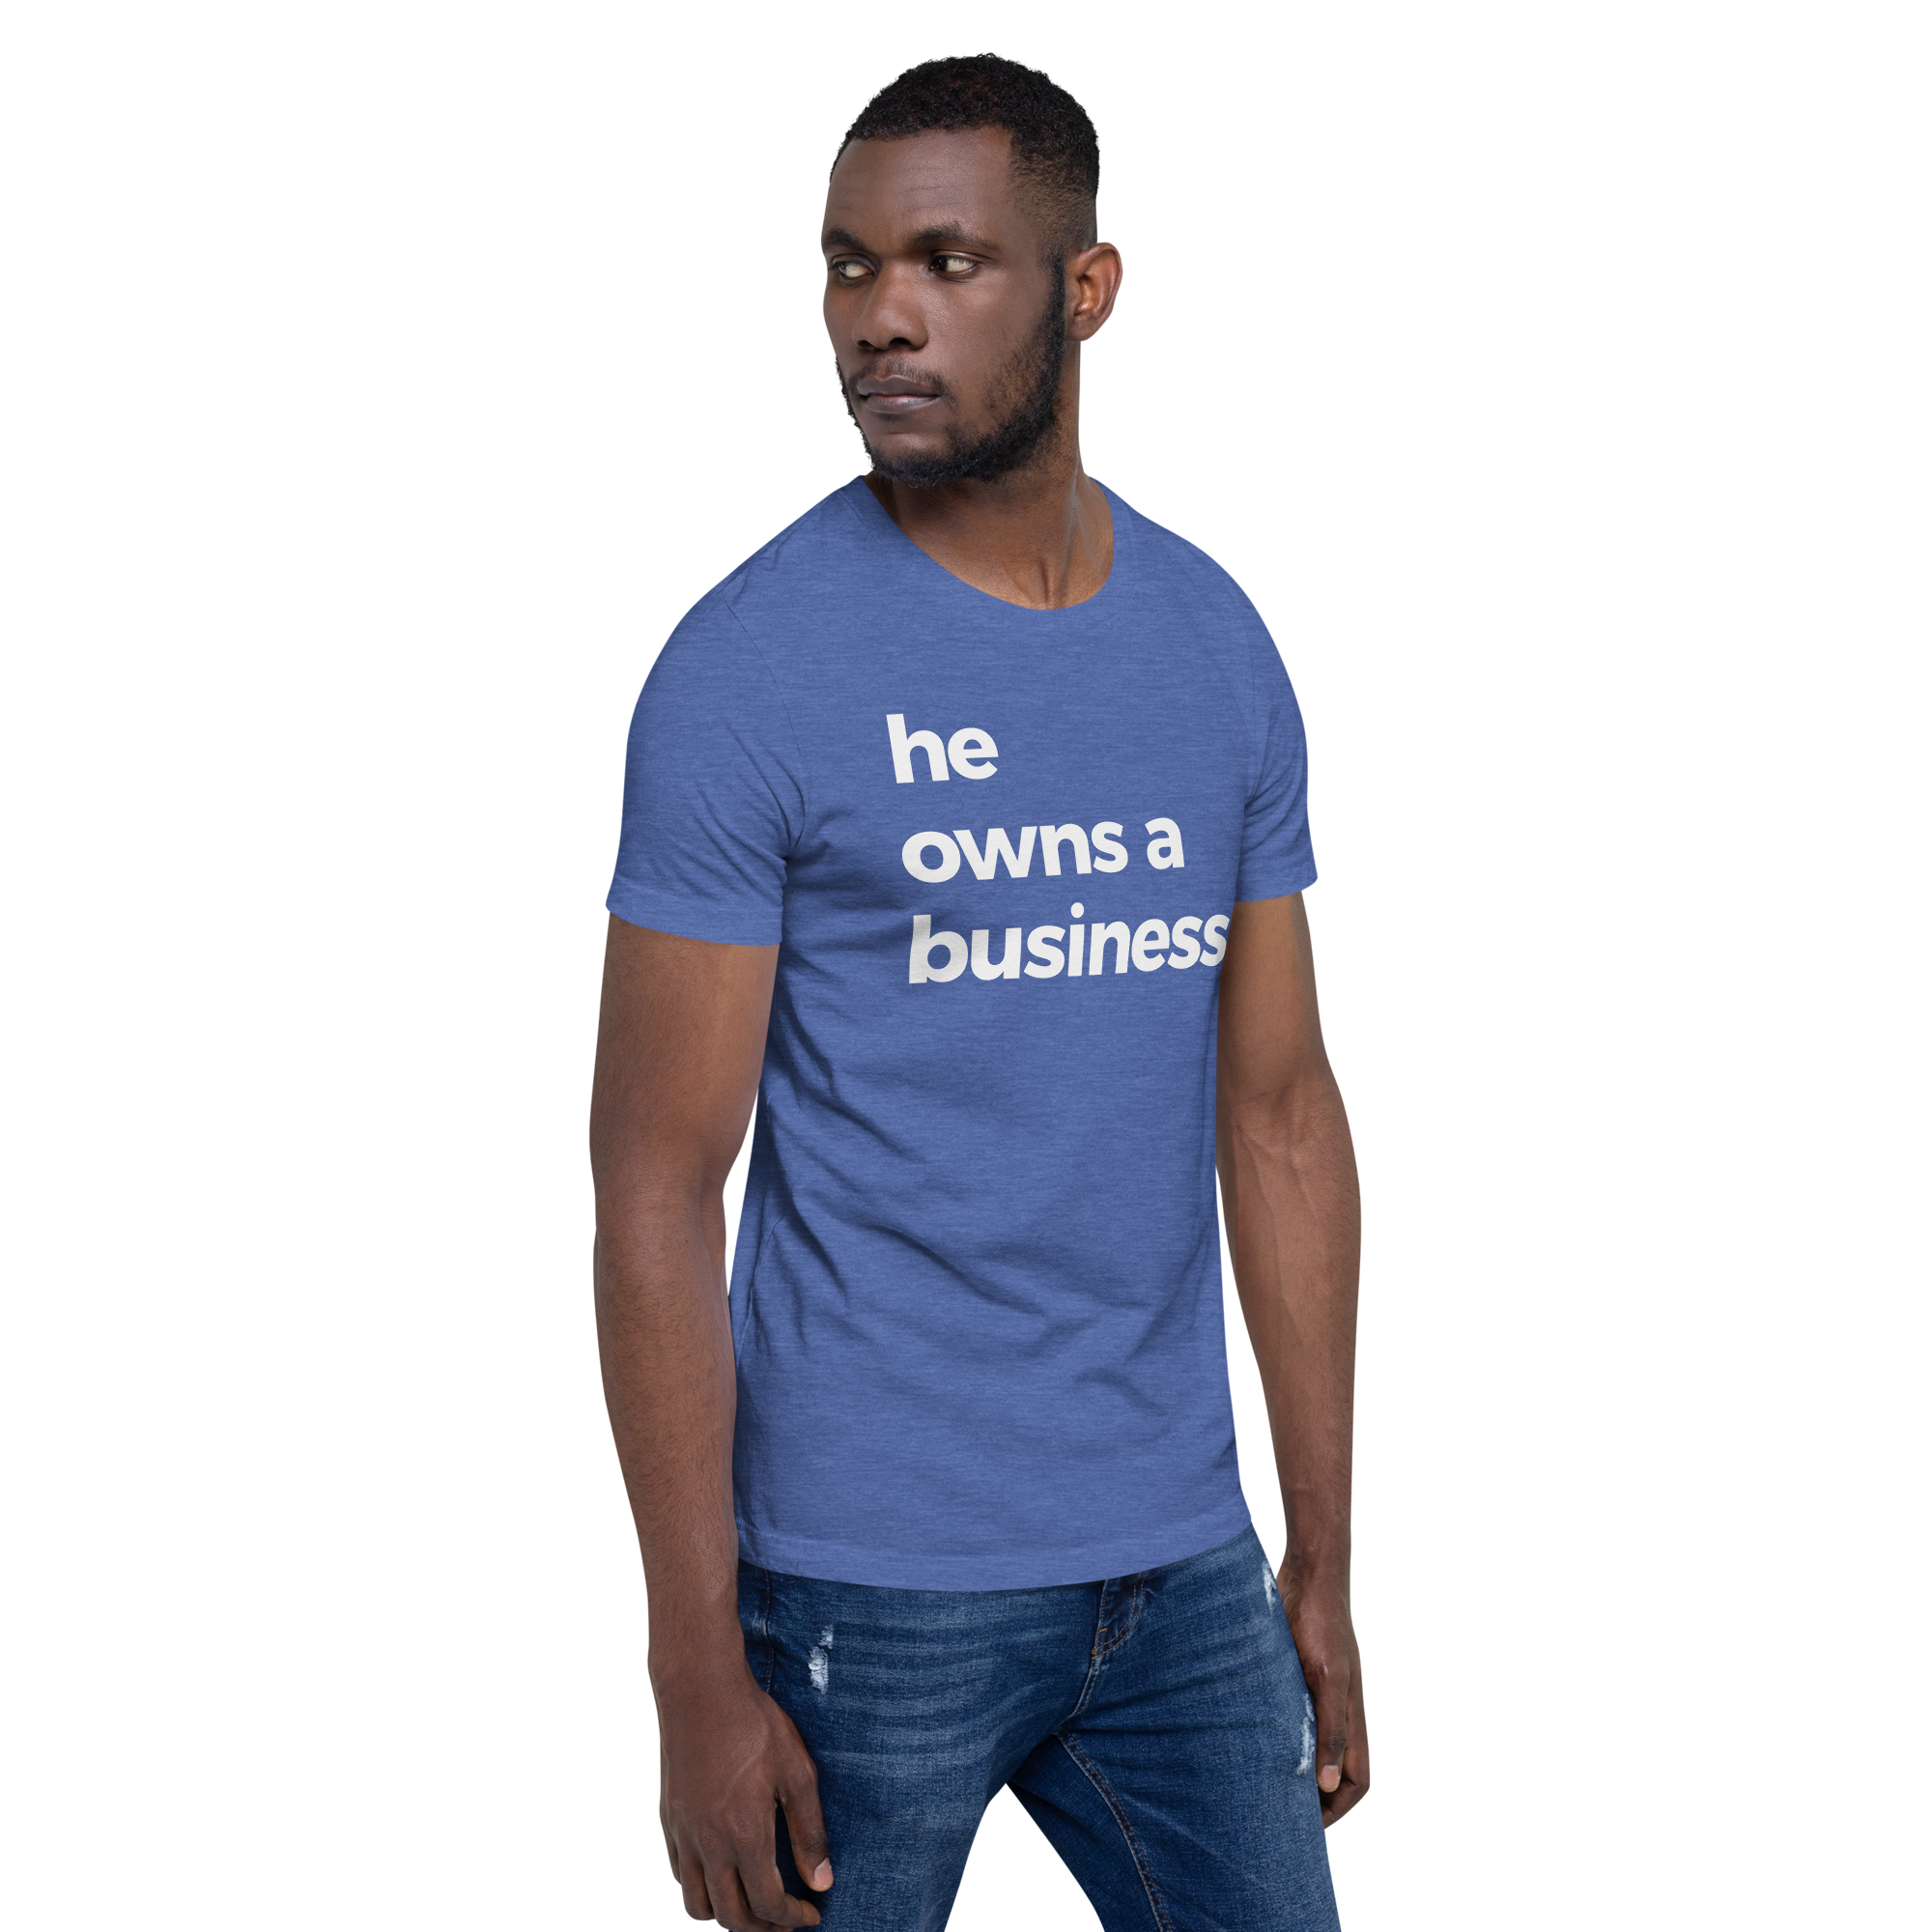 he owns a business tee